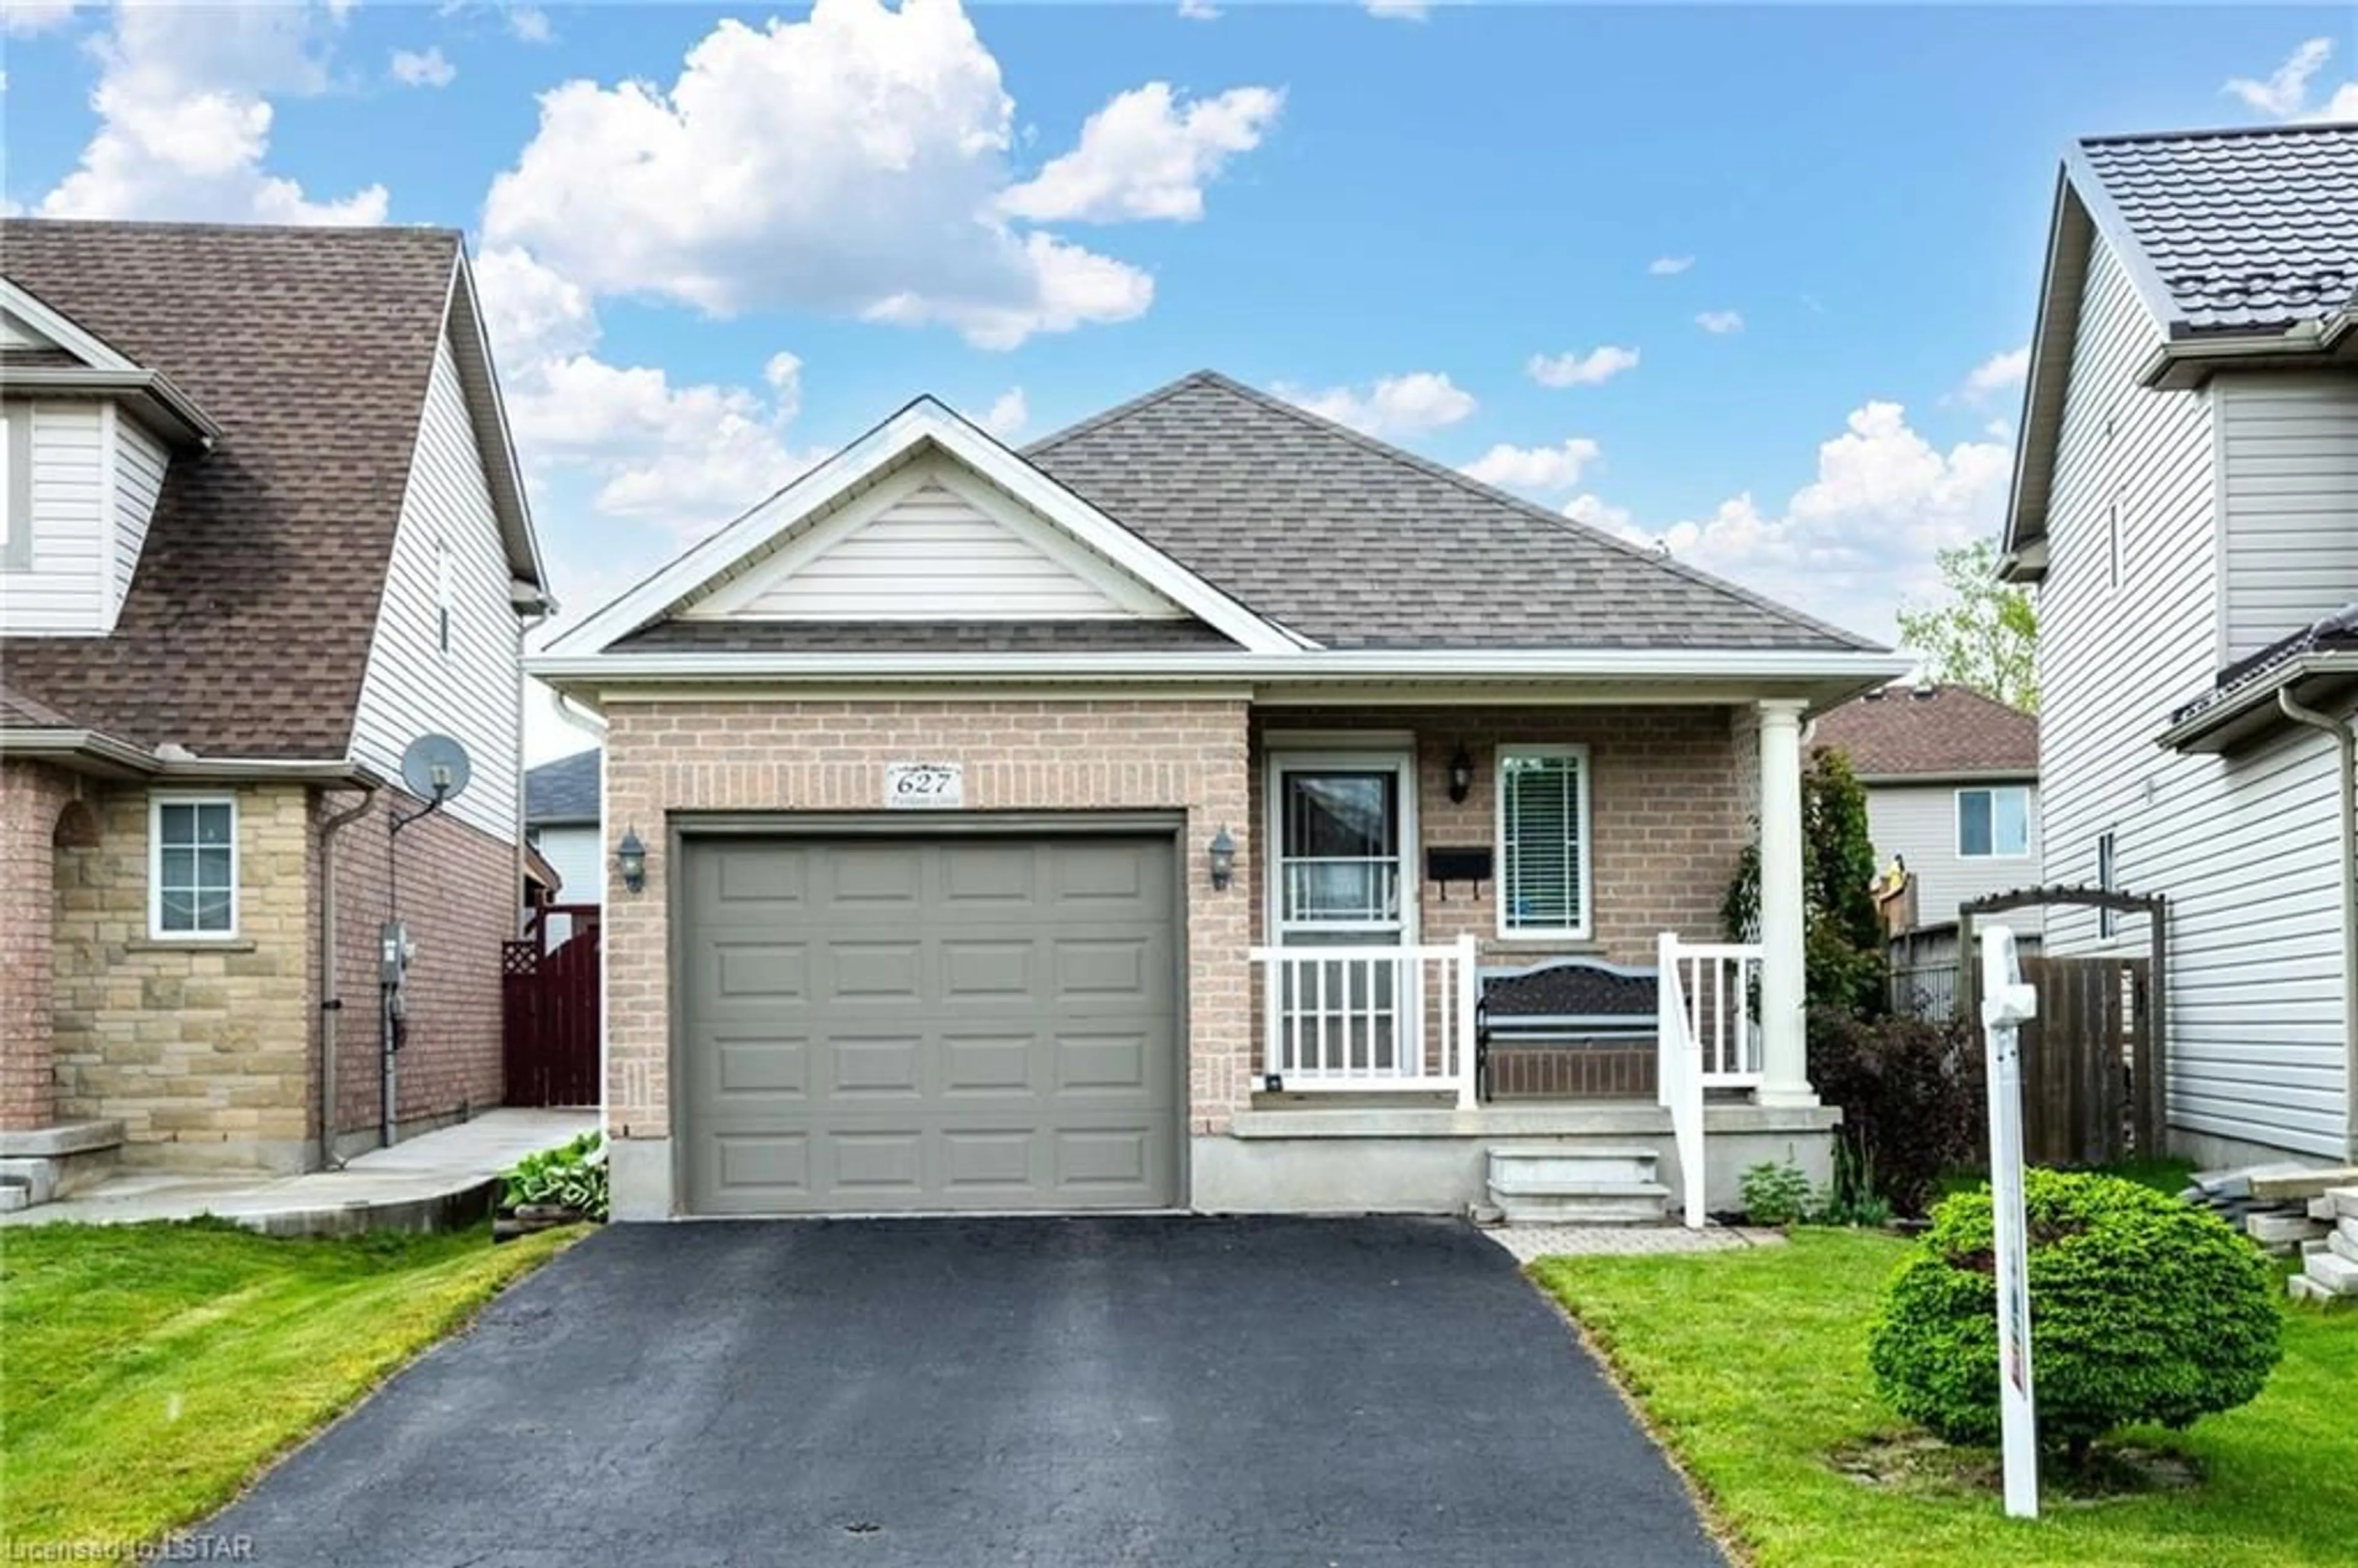 Frontside or backside of a home for 627 Fieldgate Cir, London Ontario N5V 5G1